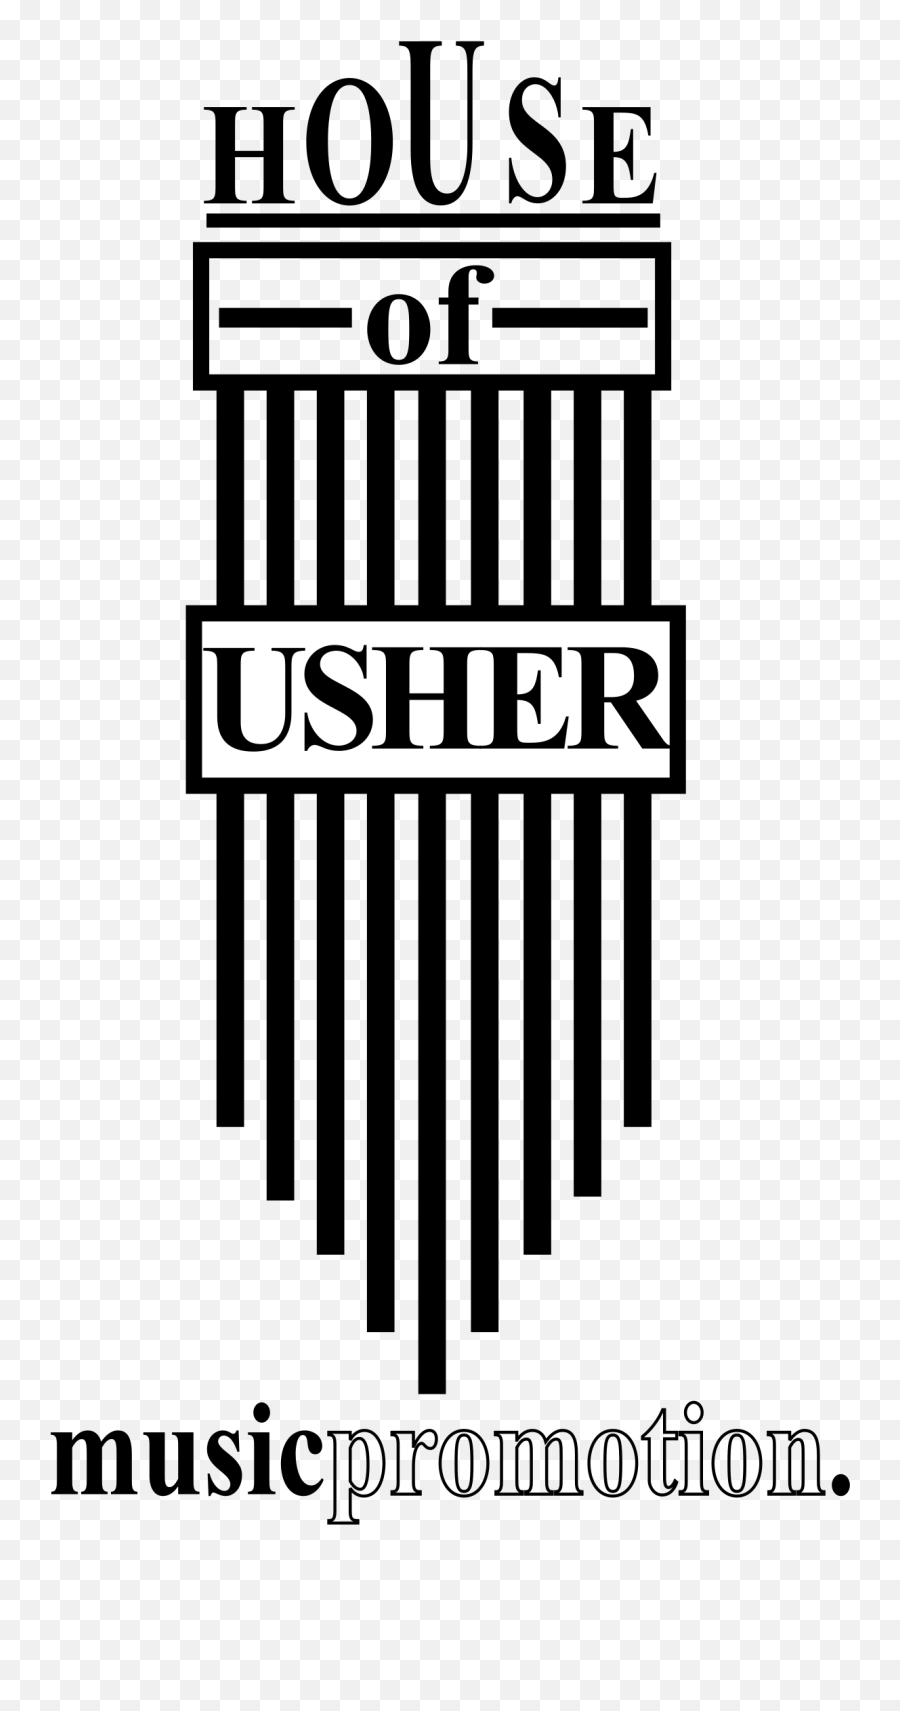 House Of Usher Music Promotion Logo Png - Poster,Usher Png